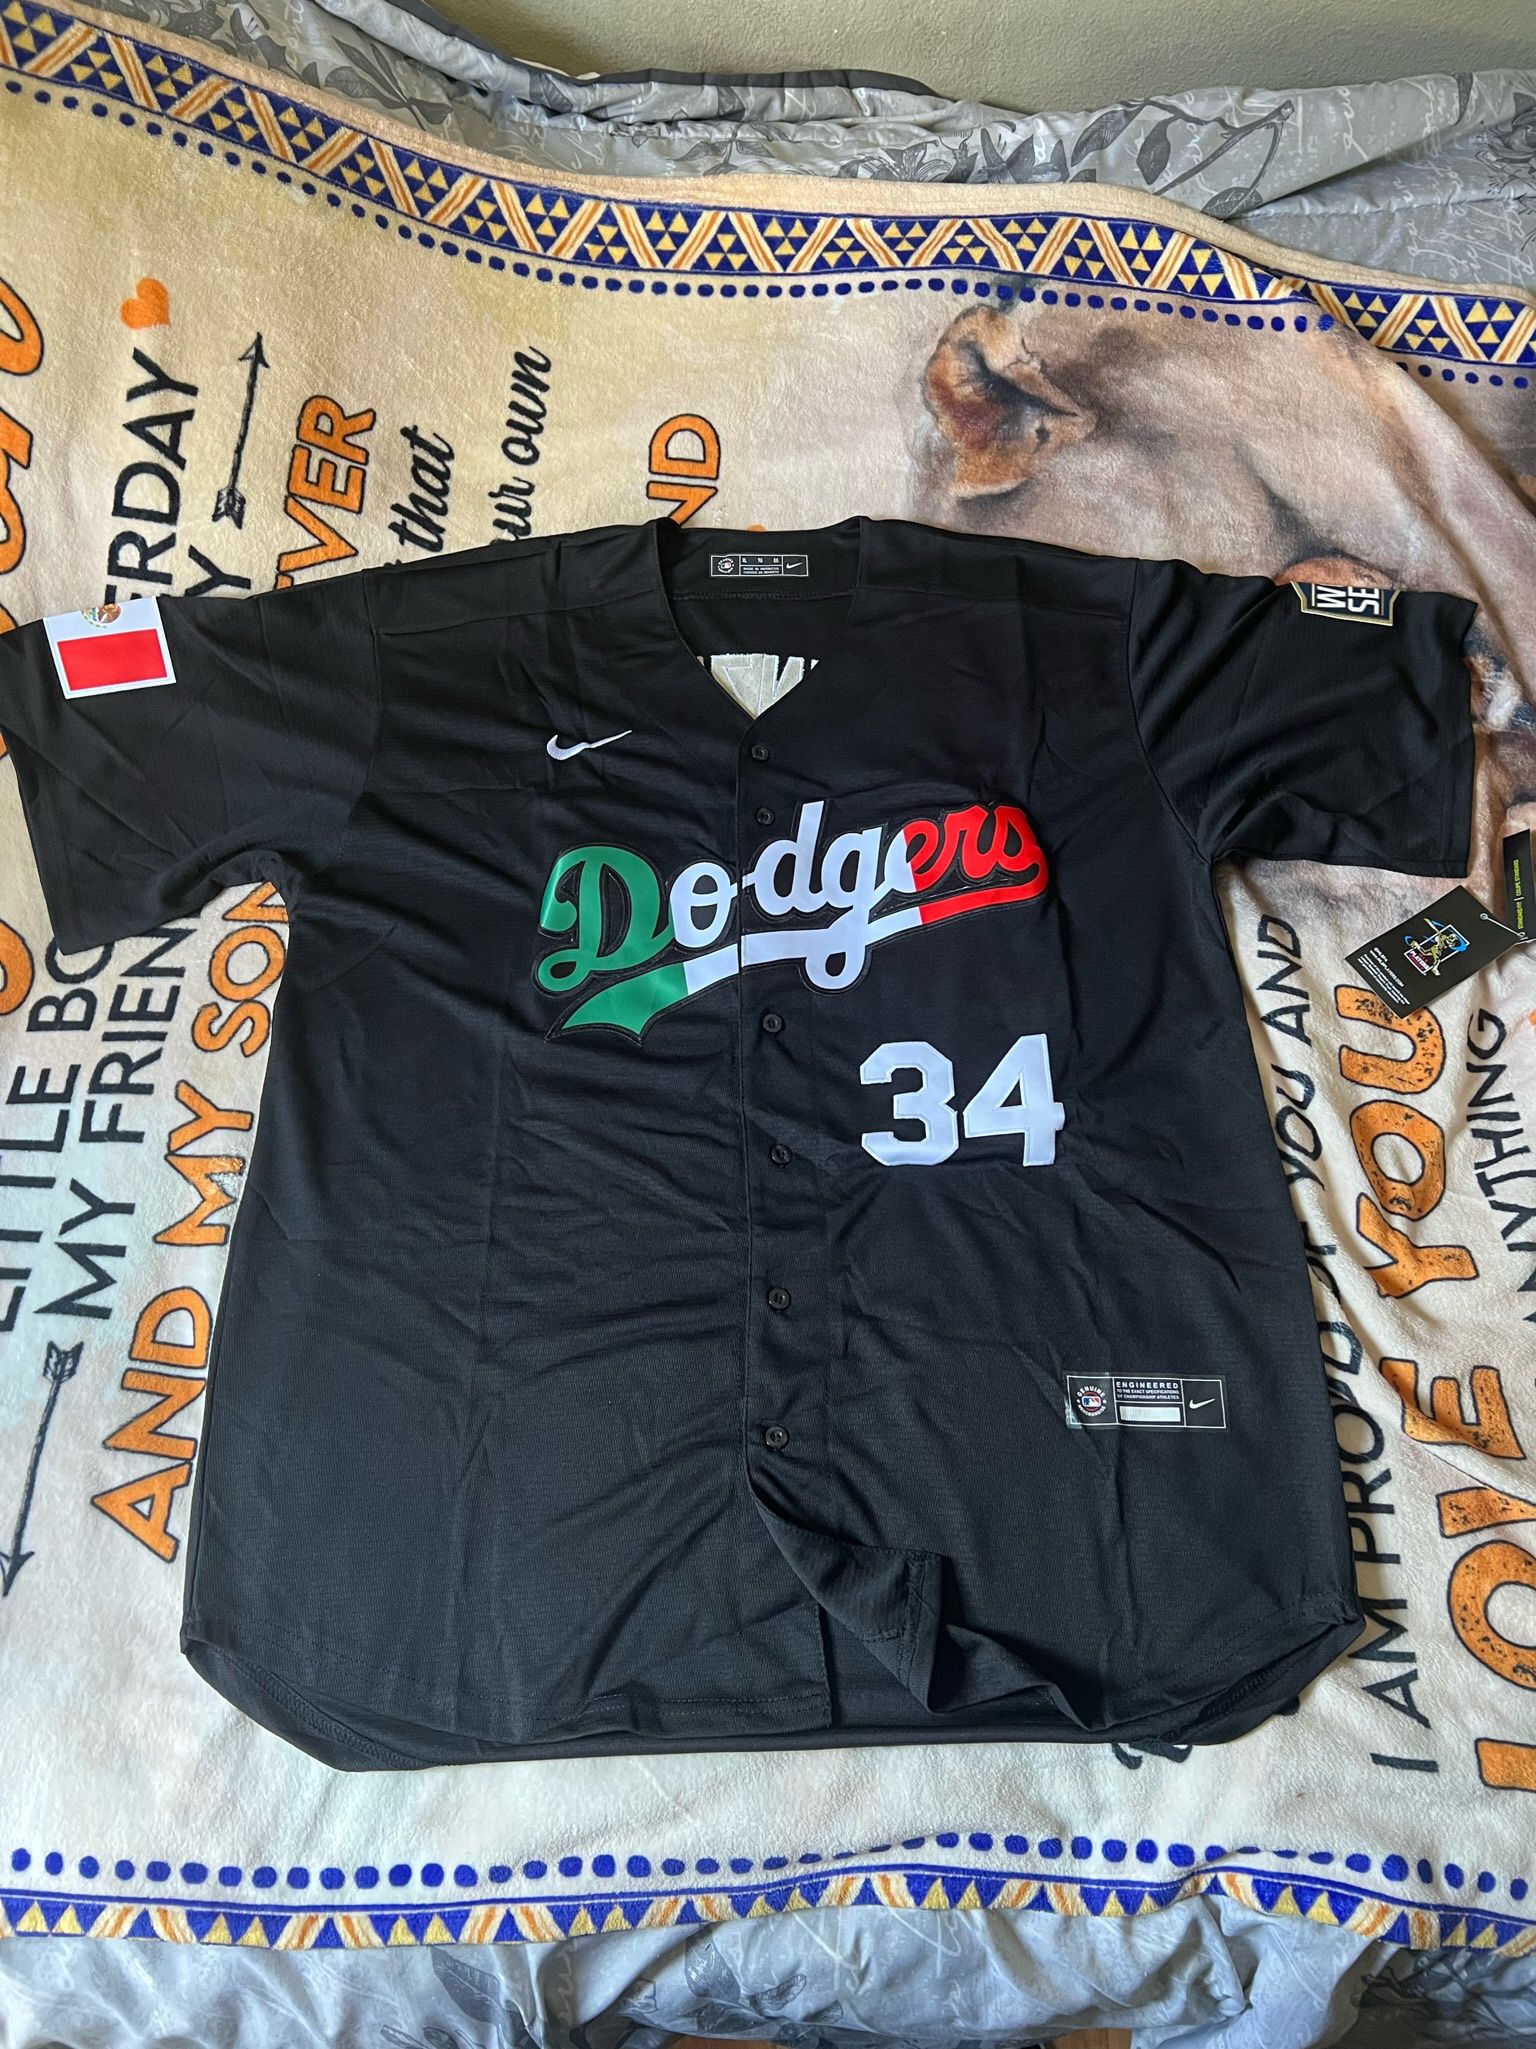 Dodgers Jersey Valenzuela #34 Heritage Mexico for Sale in Whittier